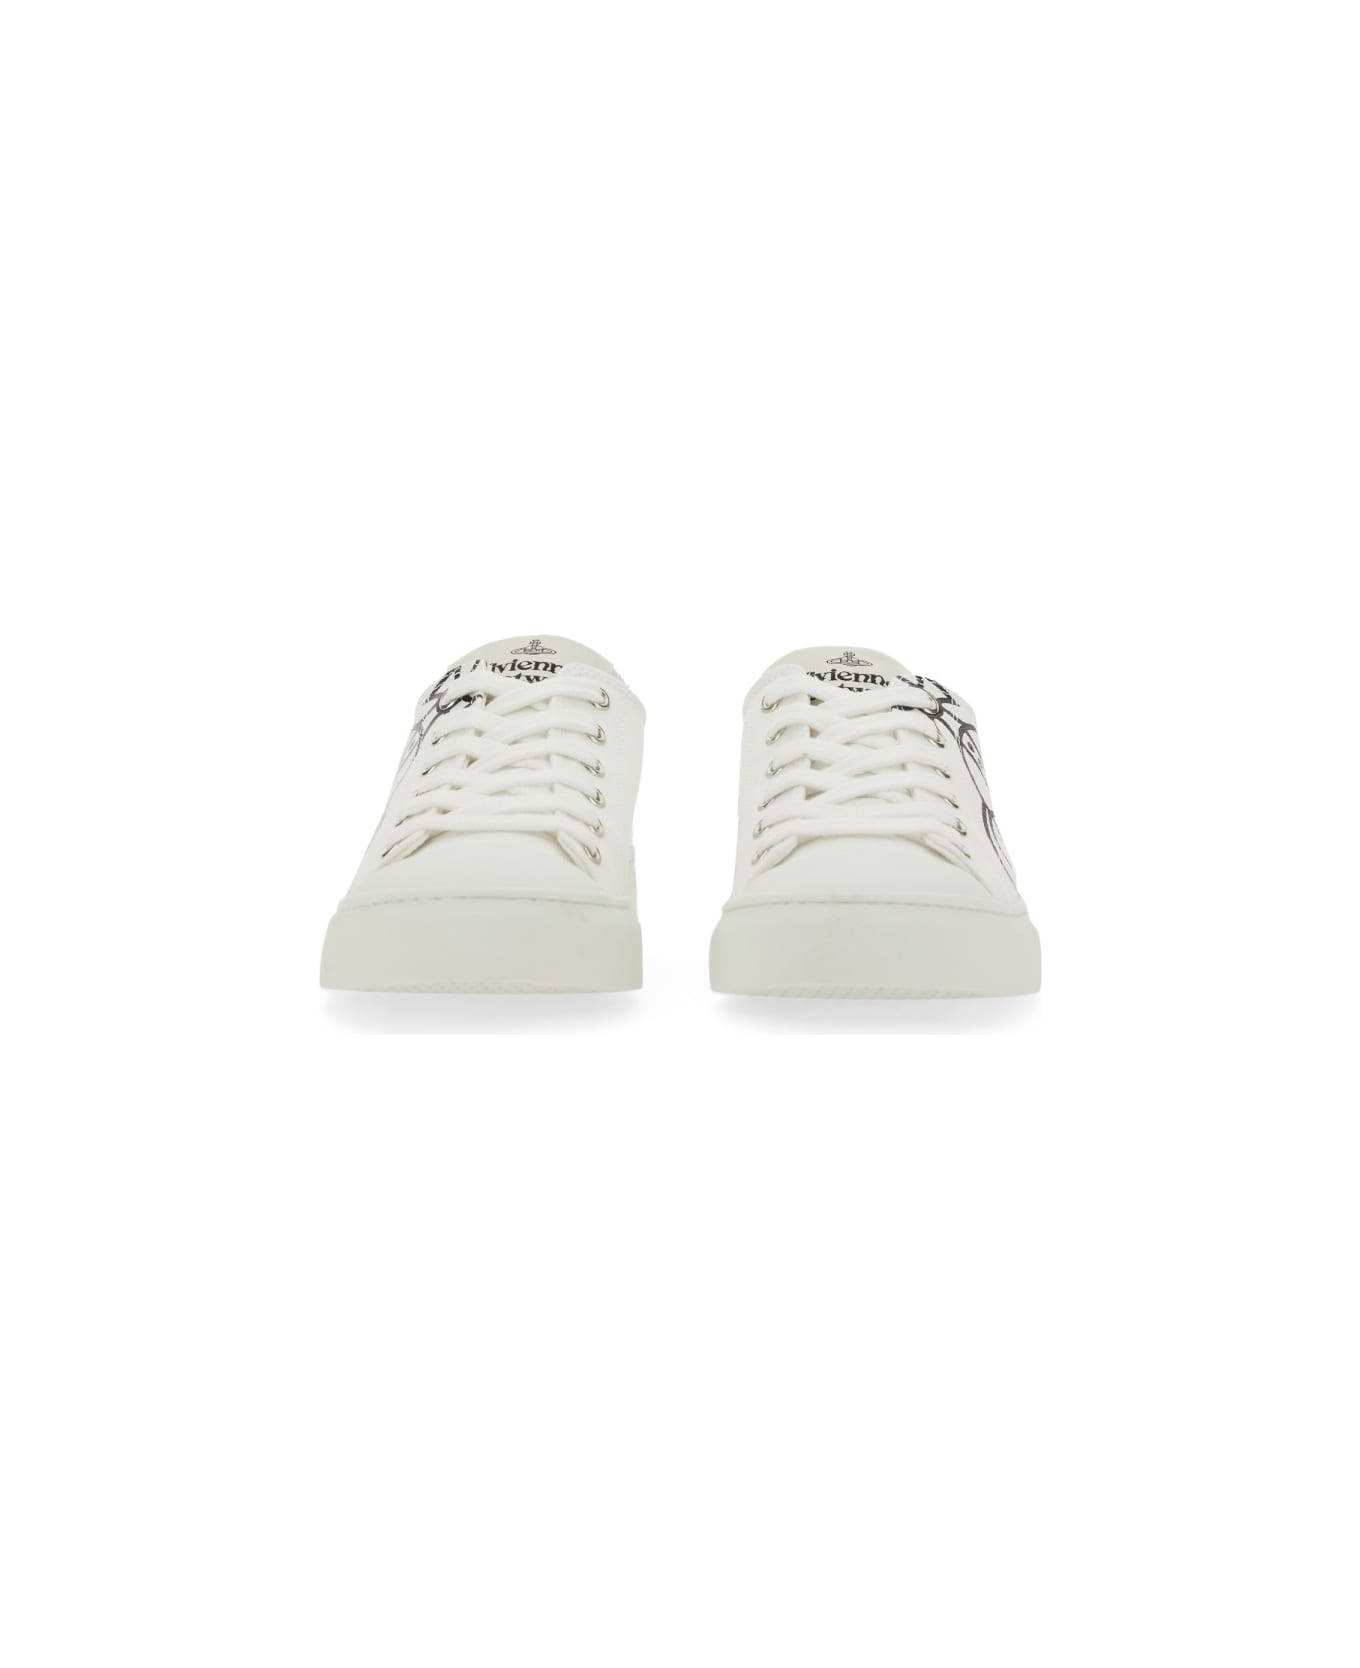 Vivienne Westwood Low Sneaker With Orb Logo - WHITE スニーカー